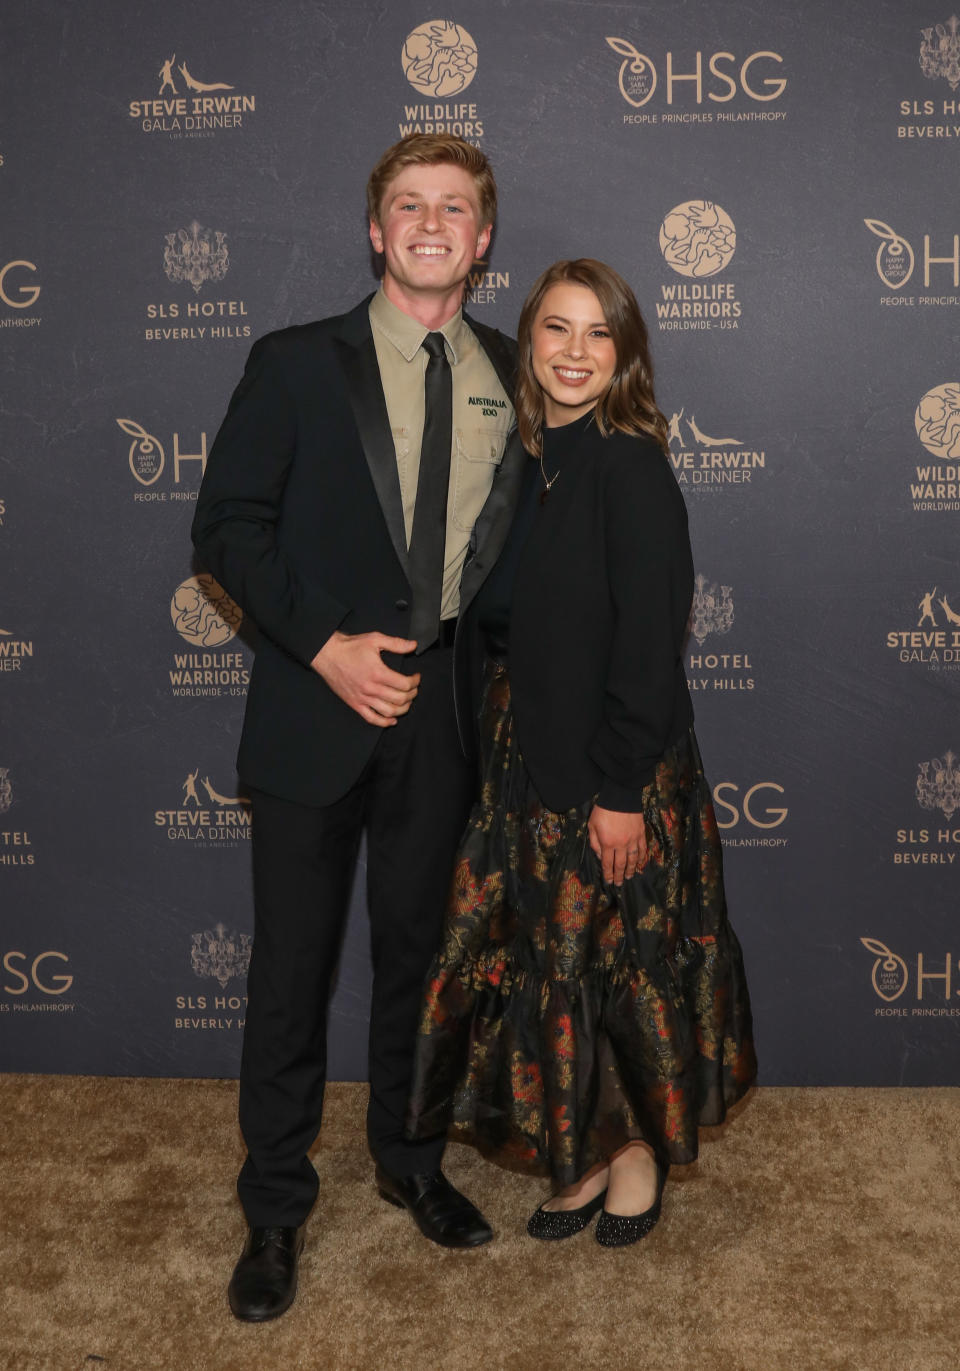 LOS ANGELES, CALIFORNIA - MAY 06: Animal Conservationists / TV Personalities Robert Clarence Irwin (L) and Bindi Irwin (R) attend the 2023 Steve Irwin Gala Dinner at SLS Hotel, a Luxury Collection Hotel, Beverly Hills on May 06, 2023 in Los Angeles, California. (Photo by Paul Archuleta/Getty Images)